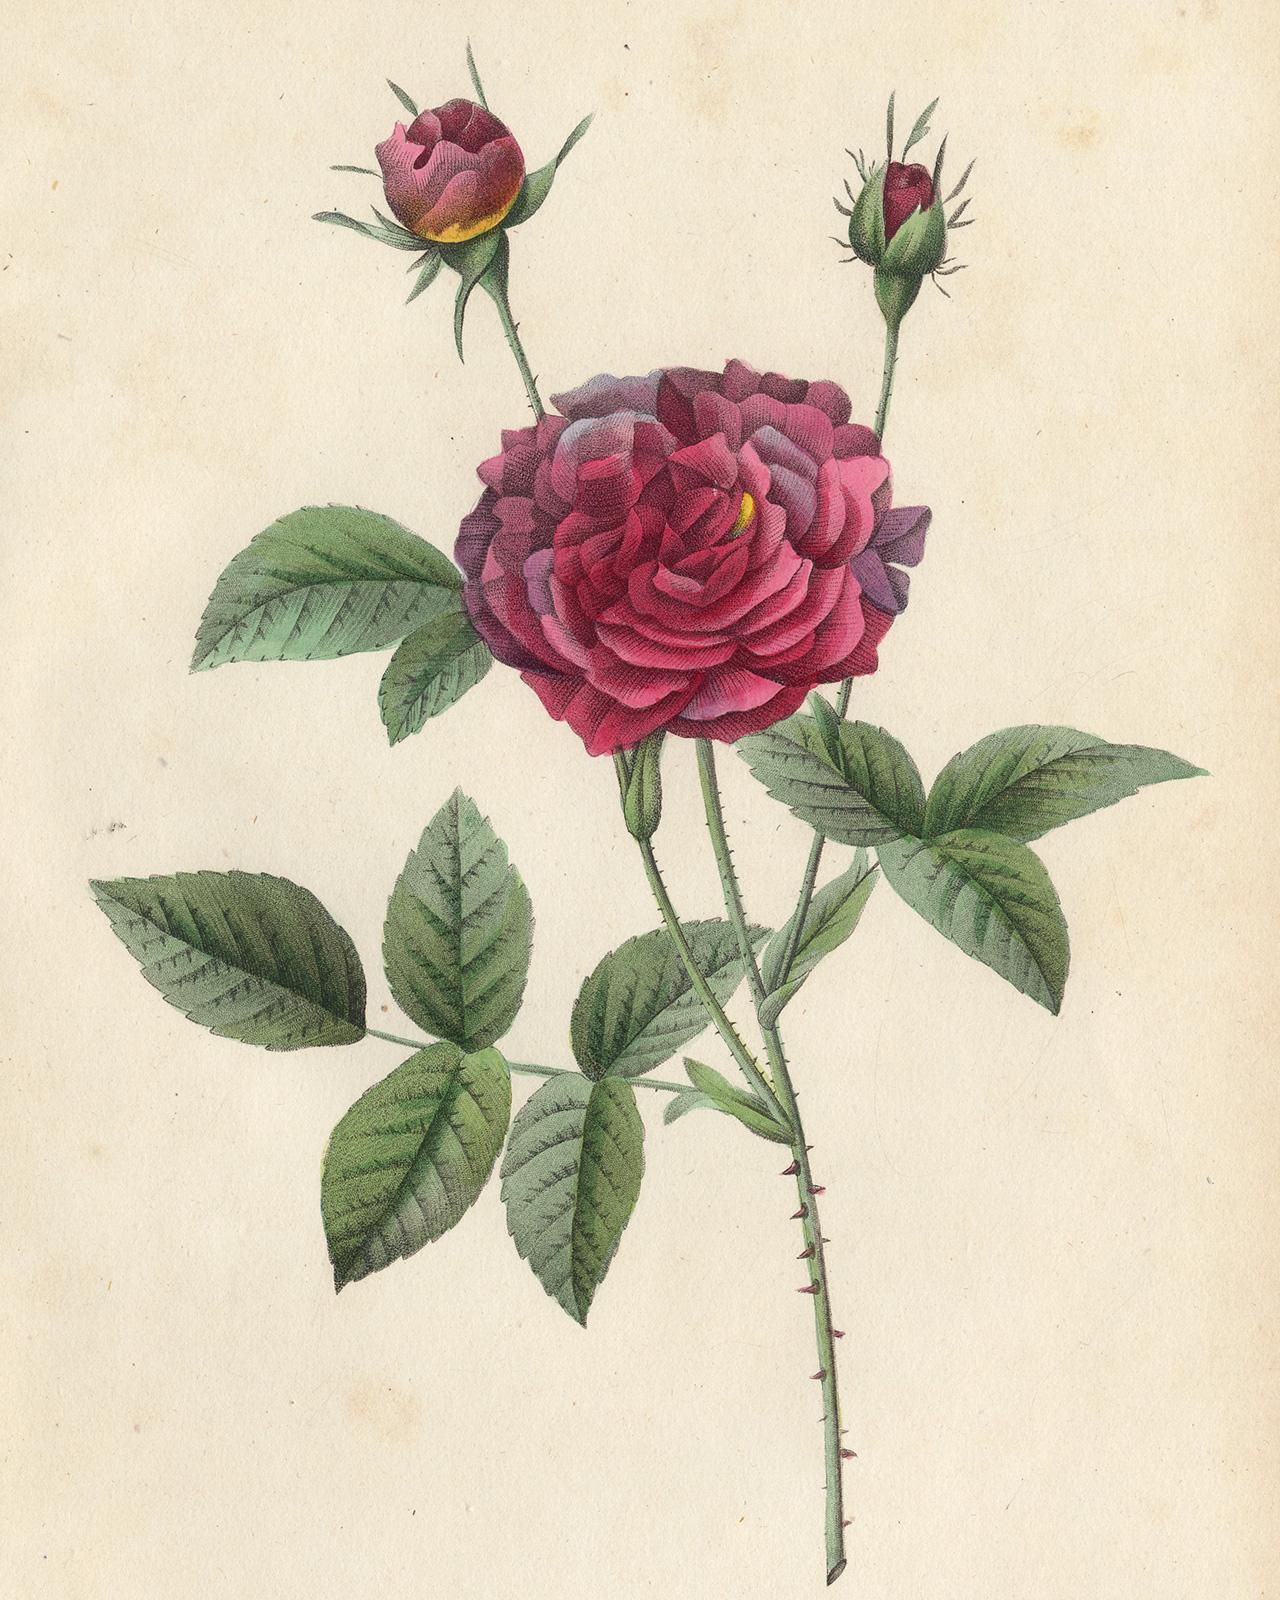 Rosa Condea by Redoute - Les Roses - Handcoloured engraving - 19th century - Print by Pierre-Joseph Redouté